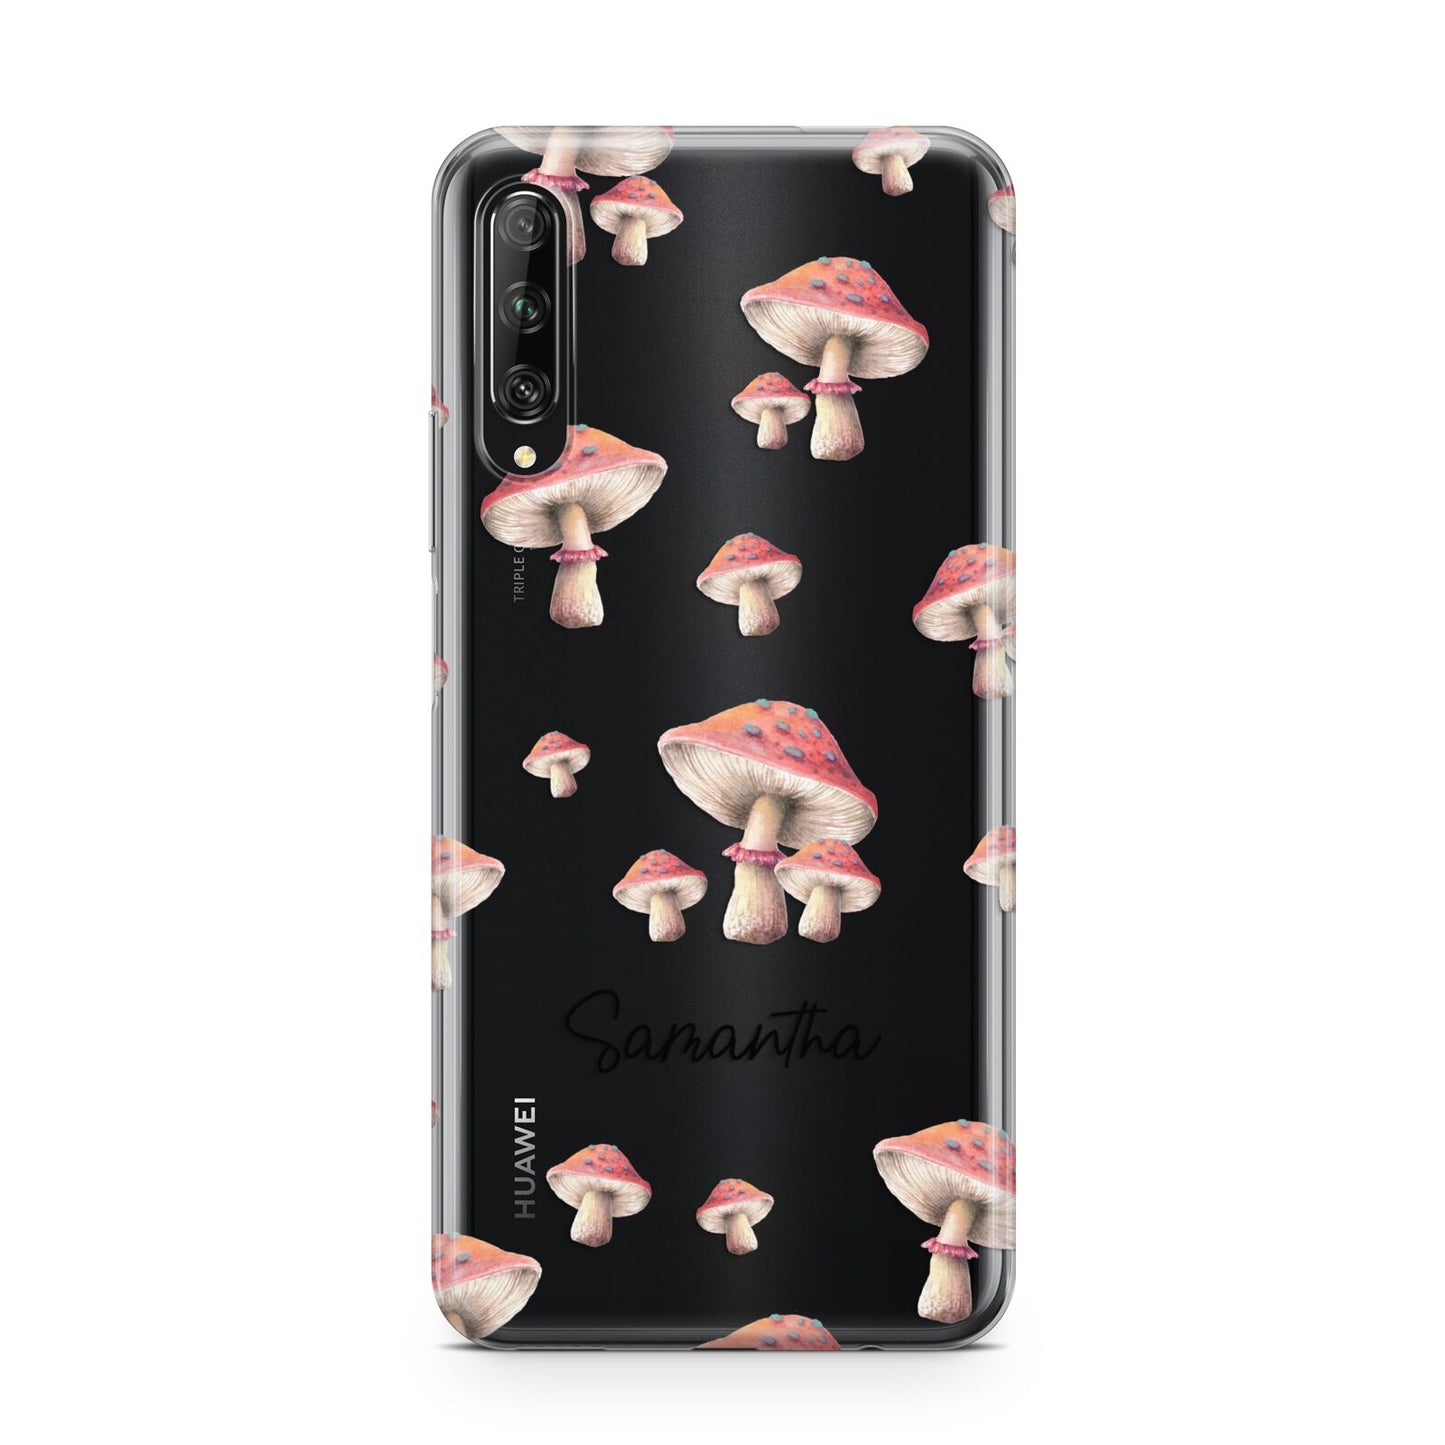 Mushroom Illustrations with Name Huawei P Smart Pro 2019